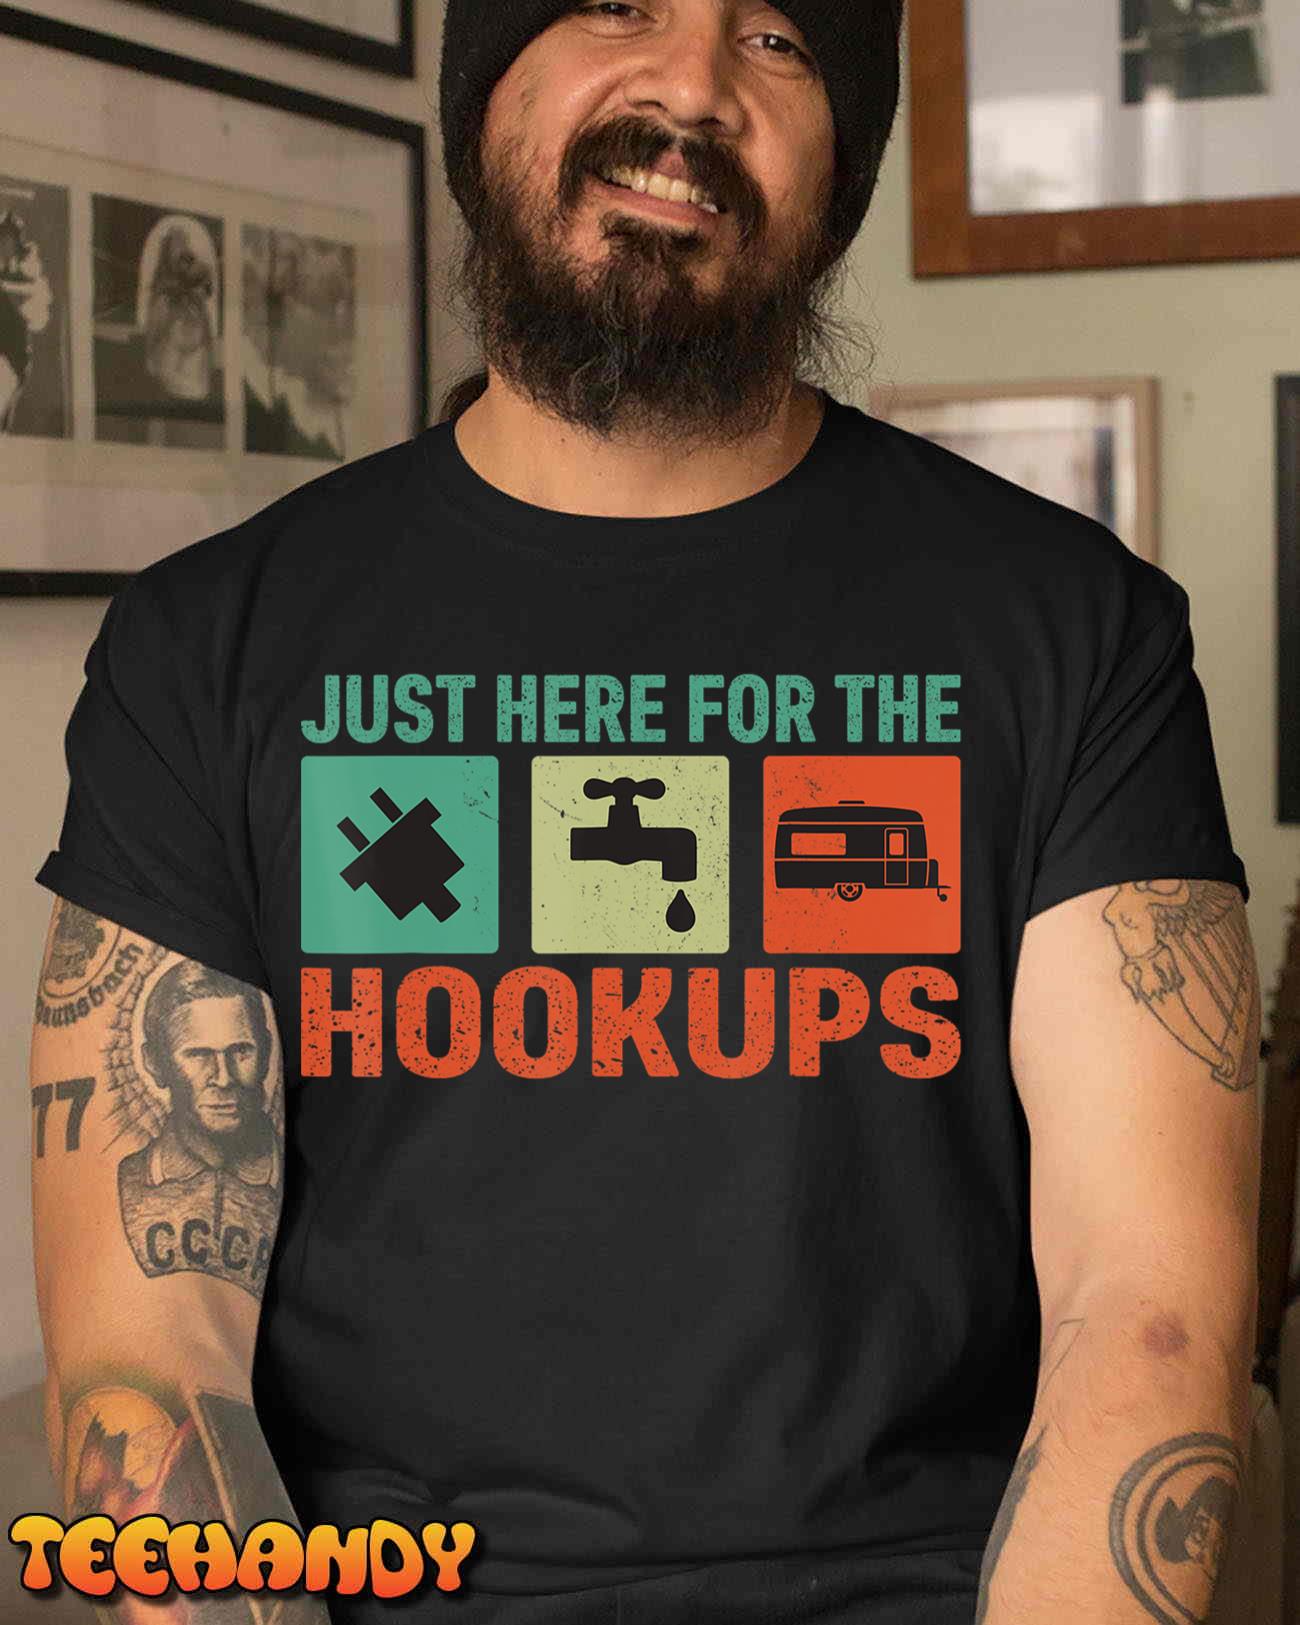 https://teehandy.com/wp-content/uploads/2024/02/im-just-here-for-the-hookups-funny-camp-rv-camper-camping-t-shirt-yzj75.jpg